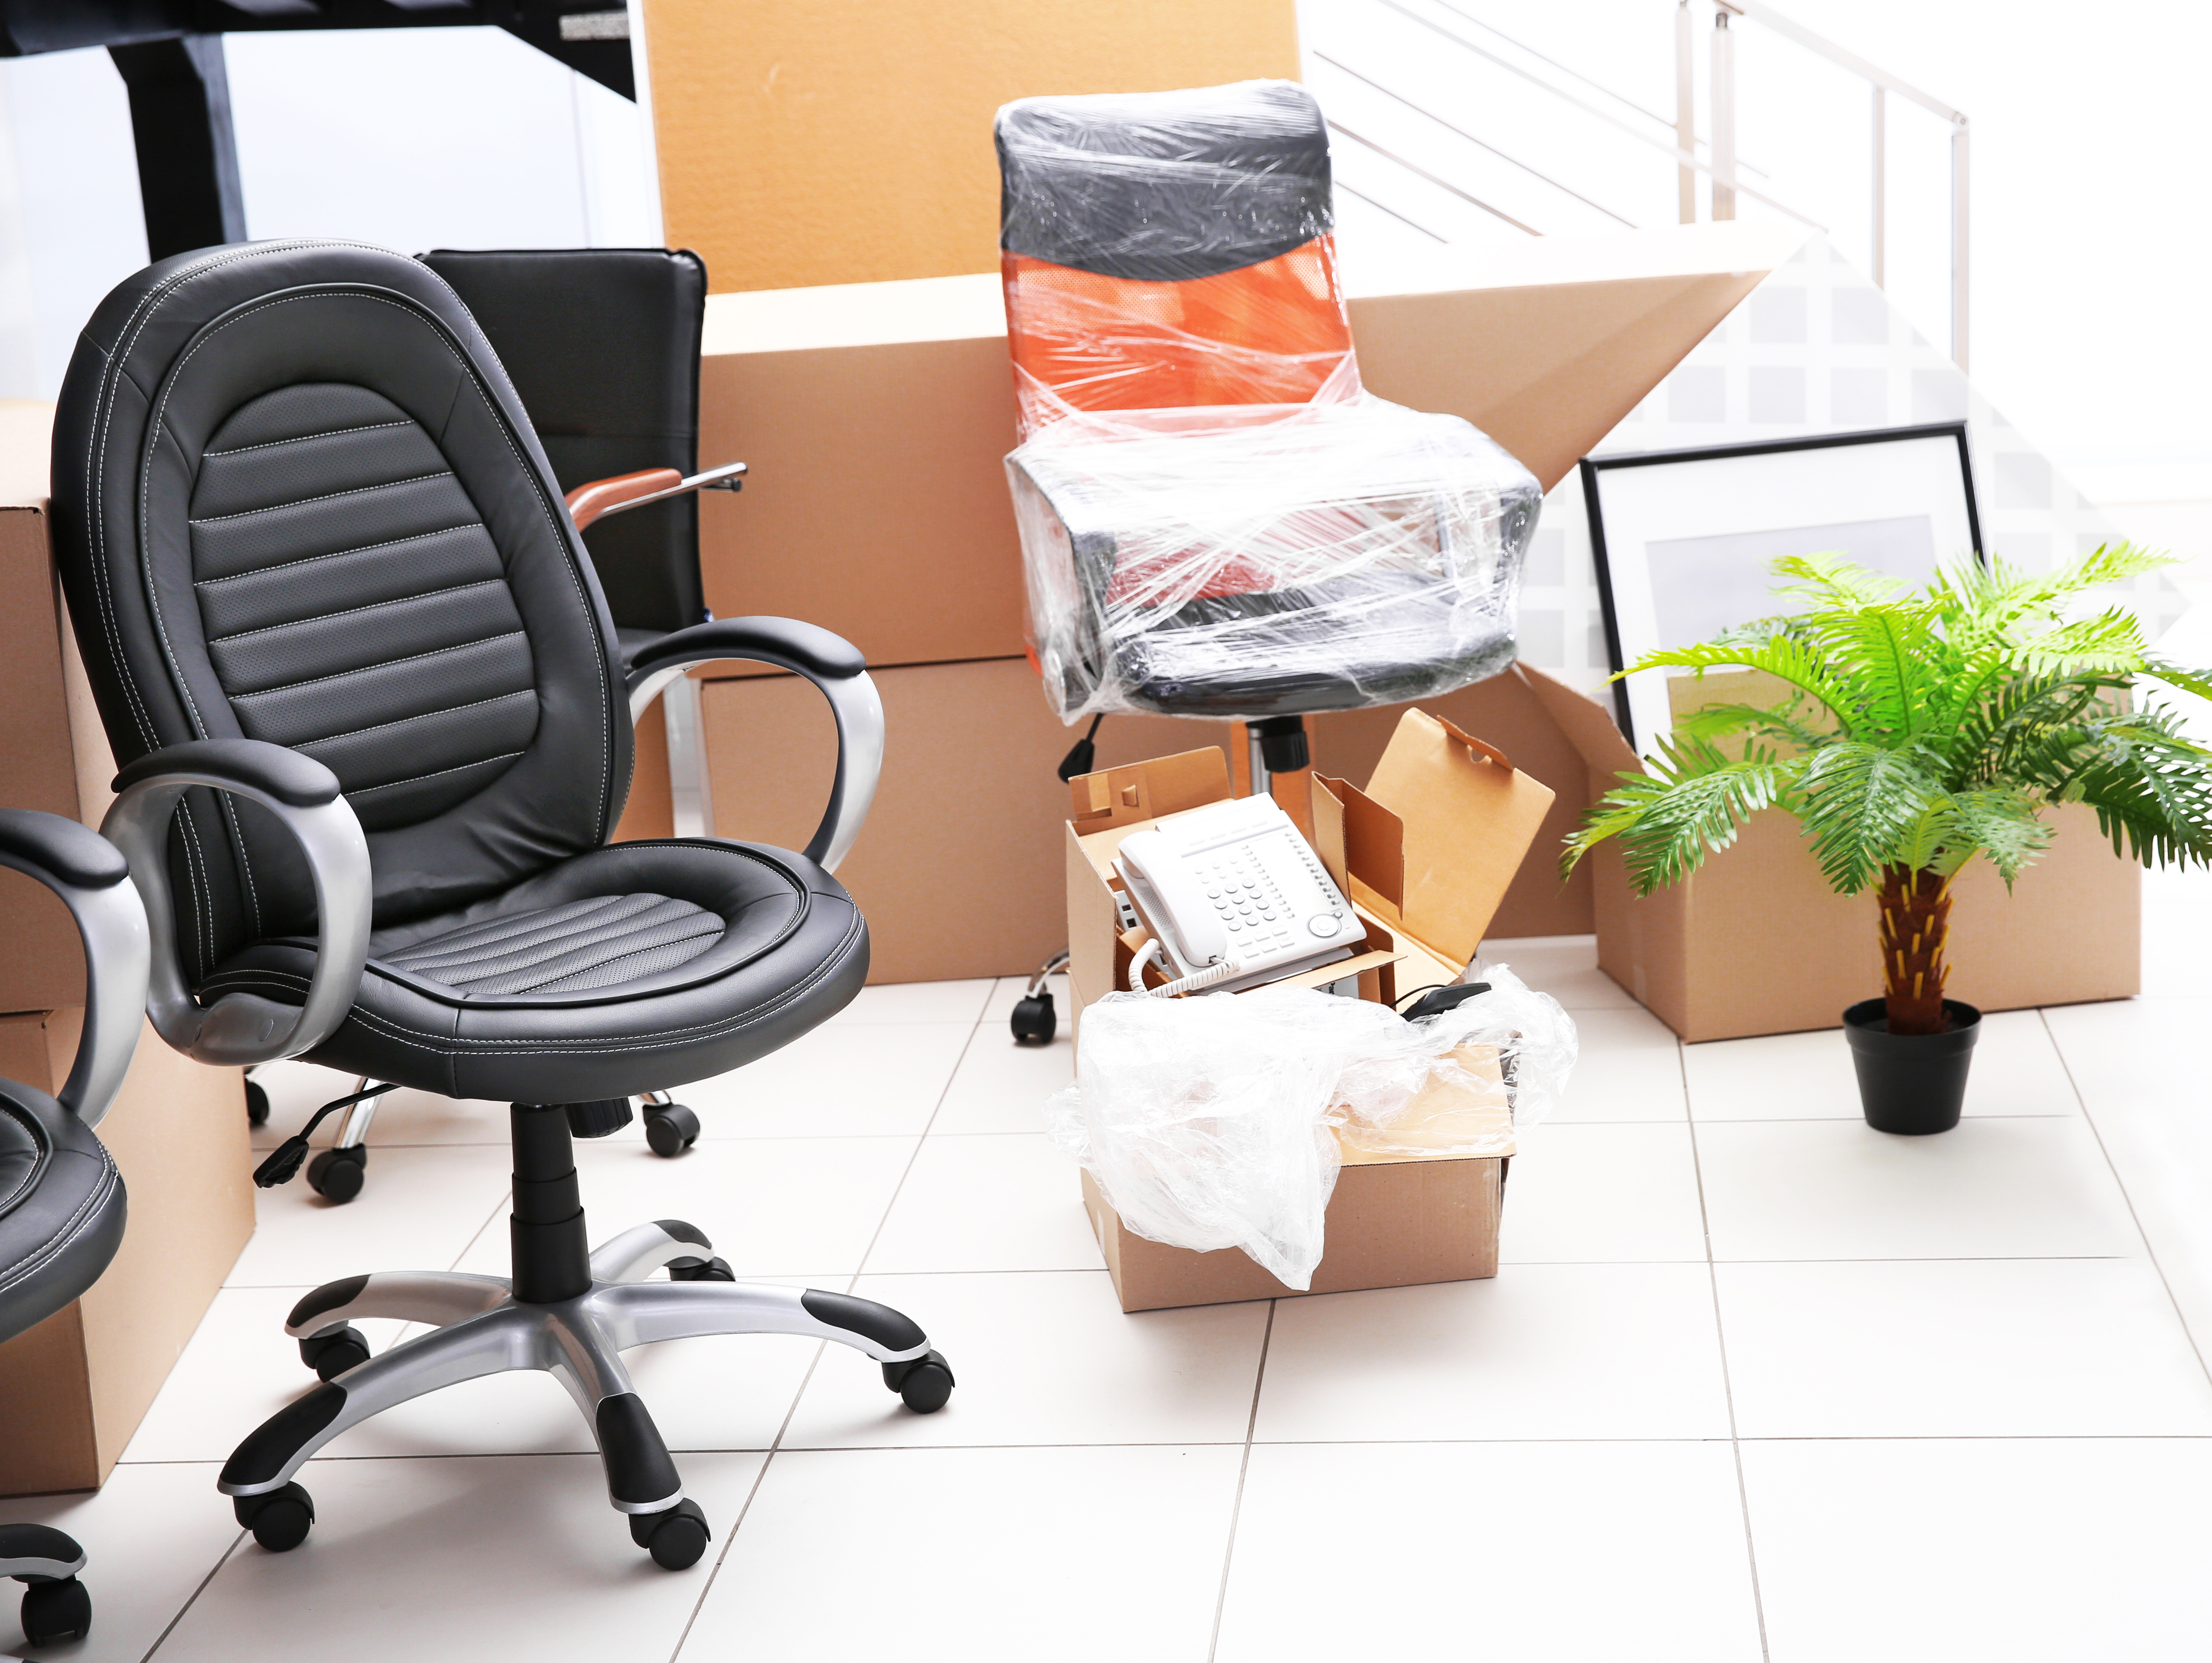 Move,concept.,unpacking,cardboard,boxes,in,a,new,office